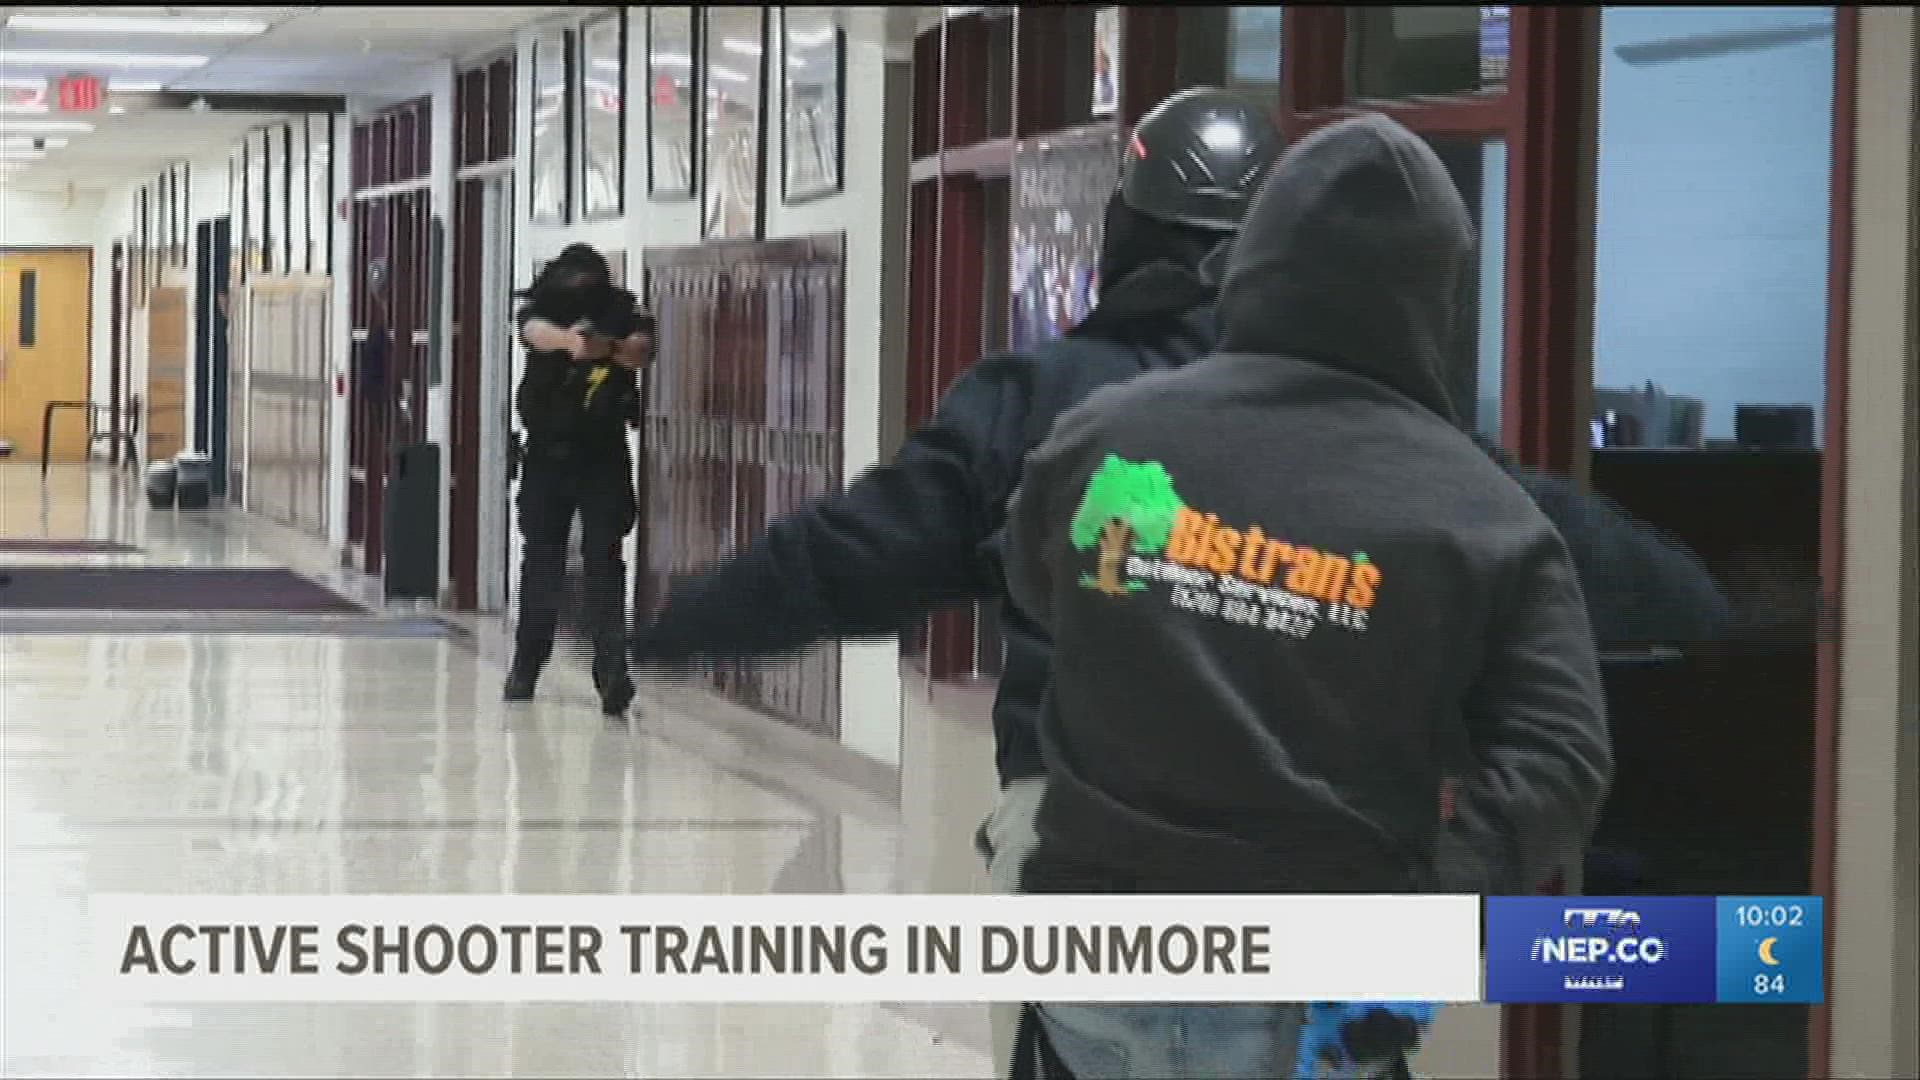 With shootings around the country at the forefront of their minds, the halls of Dunmore High School became the backdrop for various scenarios officers could face.